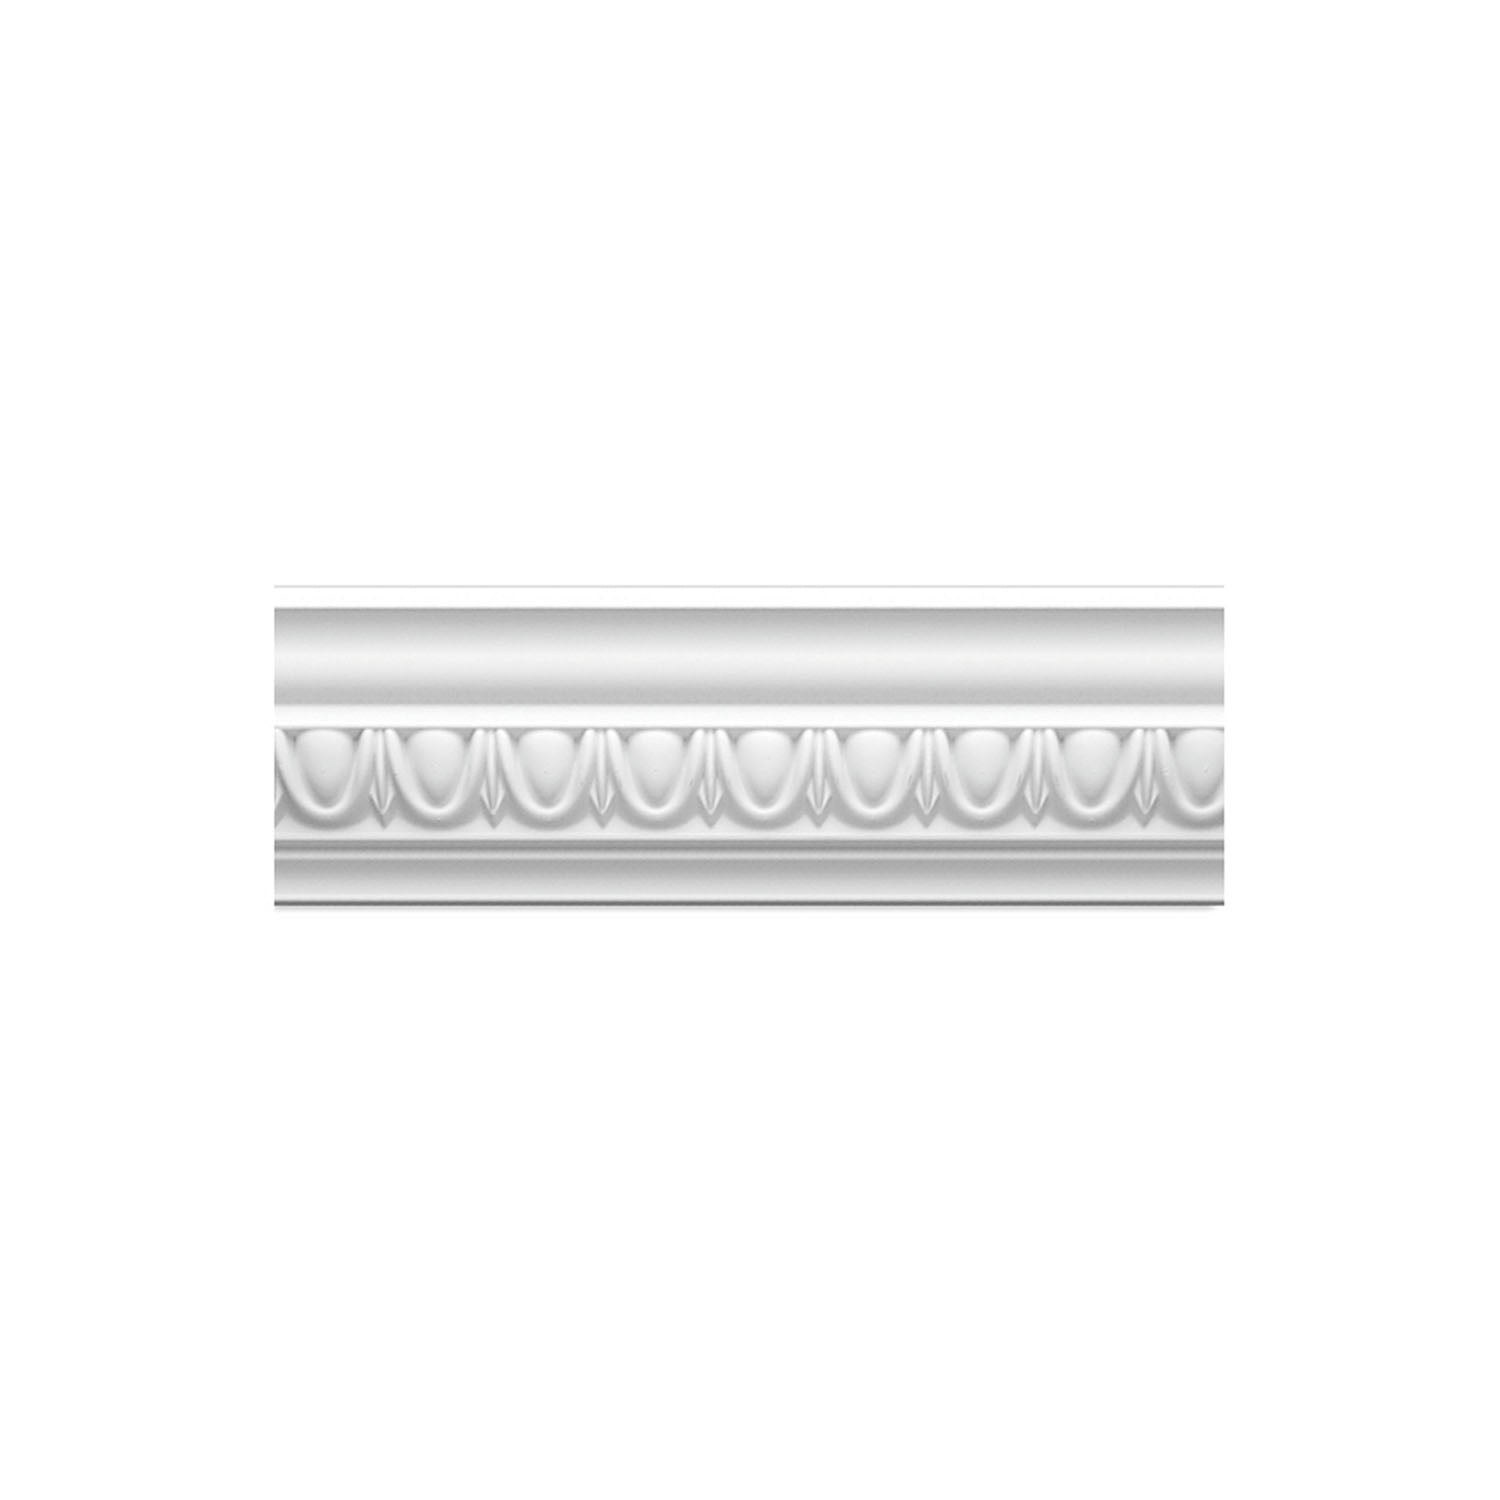 Focal Point Lighting 23135 Crown Crown Decor White